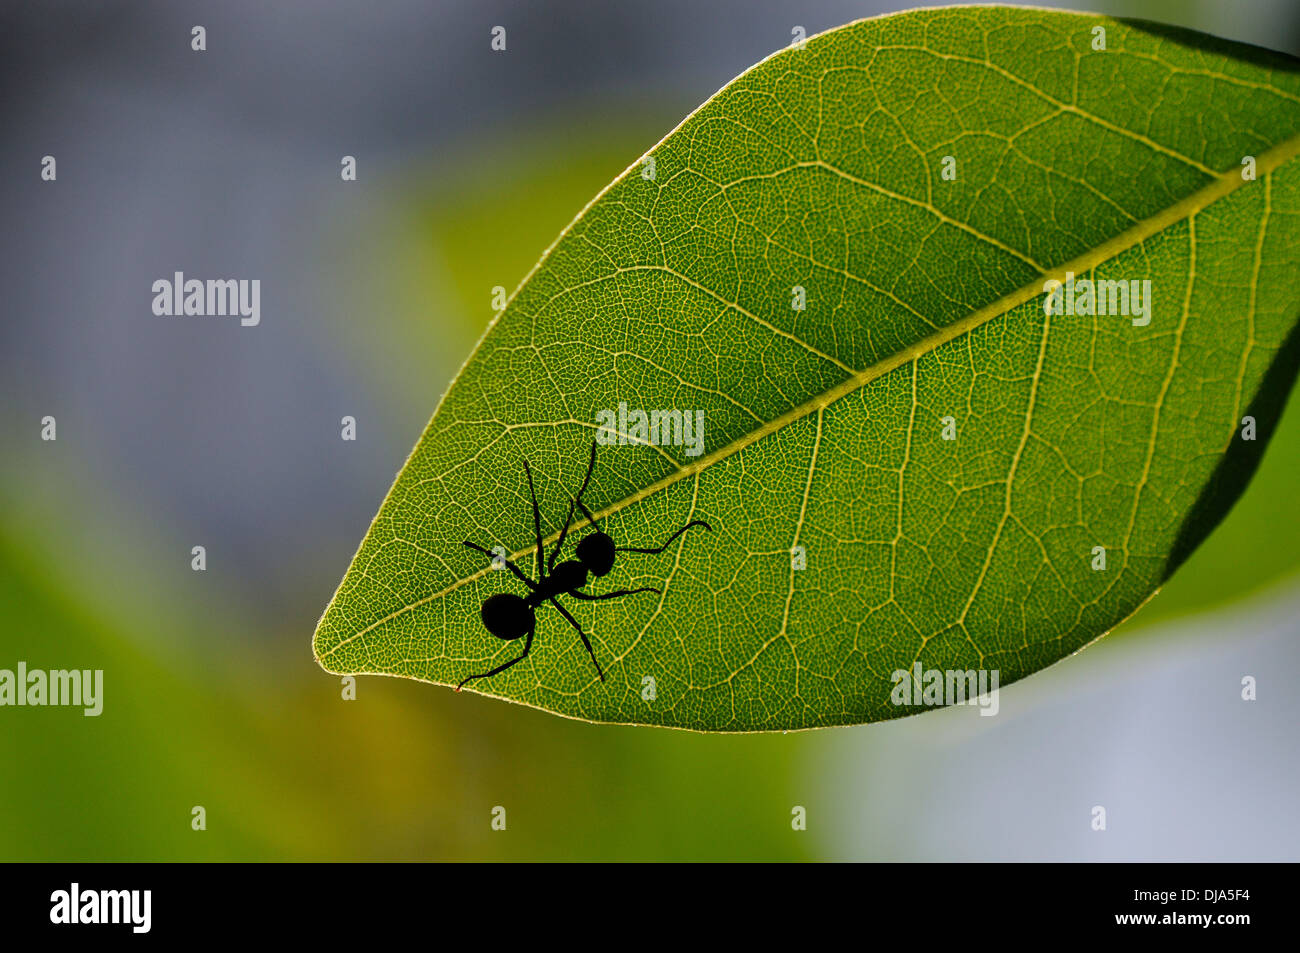 Ant silhoutte Stock Photo